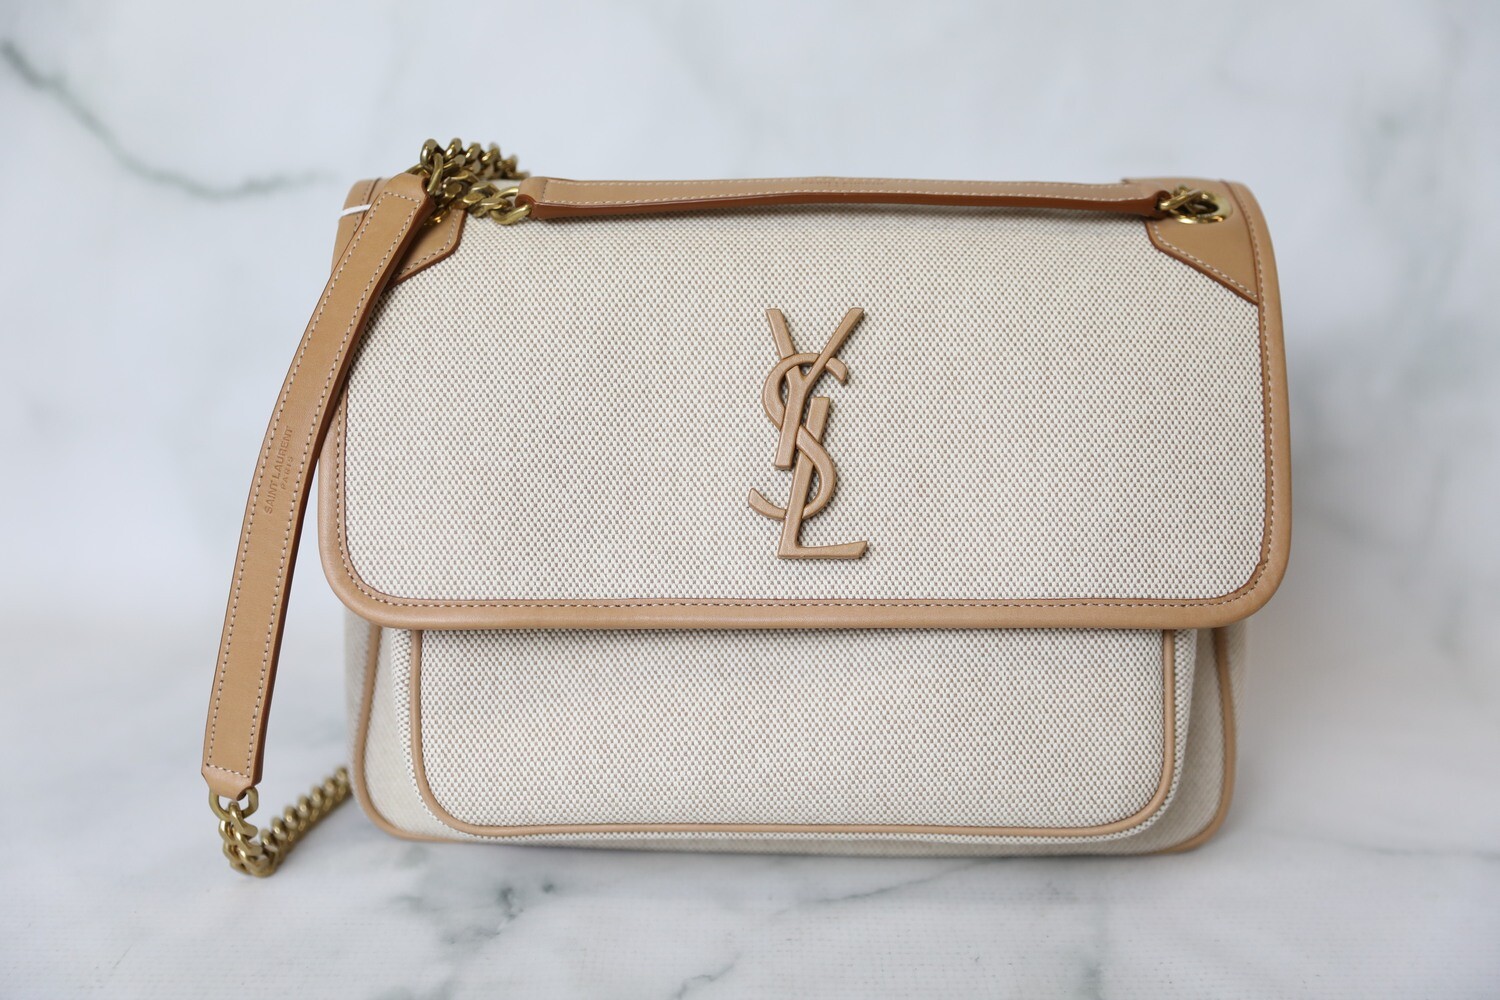 QC Great quality 1 : 1 YSL Niki Bag; It has space for you to carry